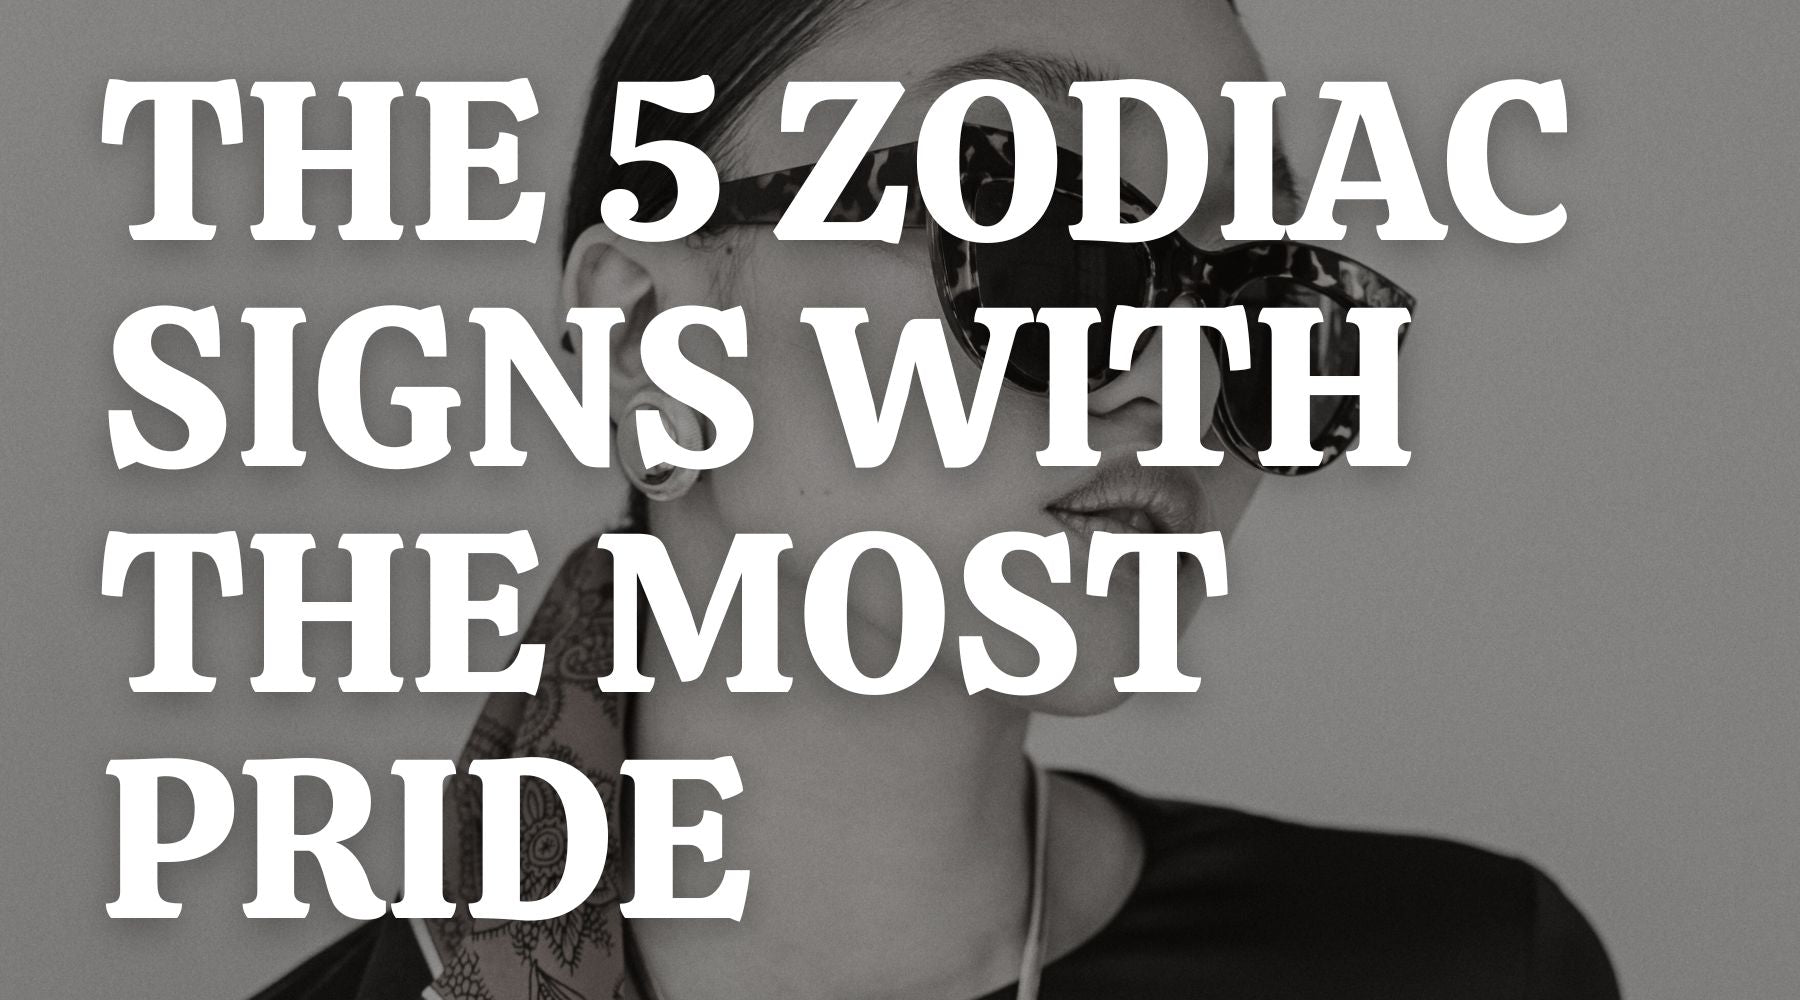 The 5 Zodiac Signs With the Most Pride